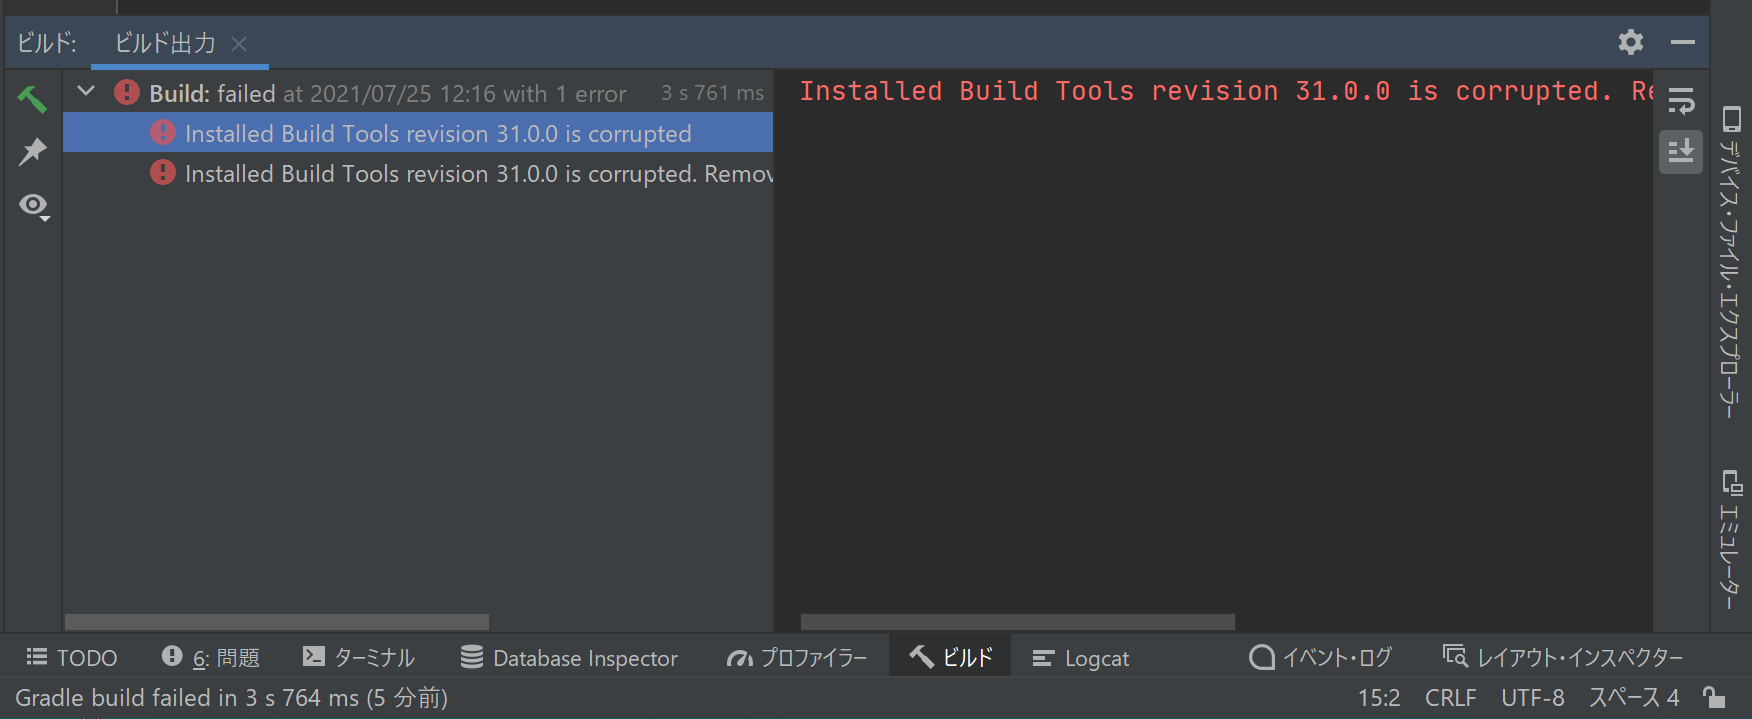 Android Studio】ビルド時にエラーInstalled Build Tools revision  is corrupted.  Remove and install again using the SDK Manager.が表示される。 -  アンラッキーシステムズのやり方、方法論。